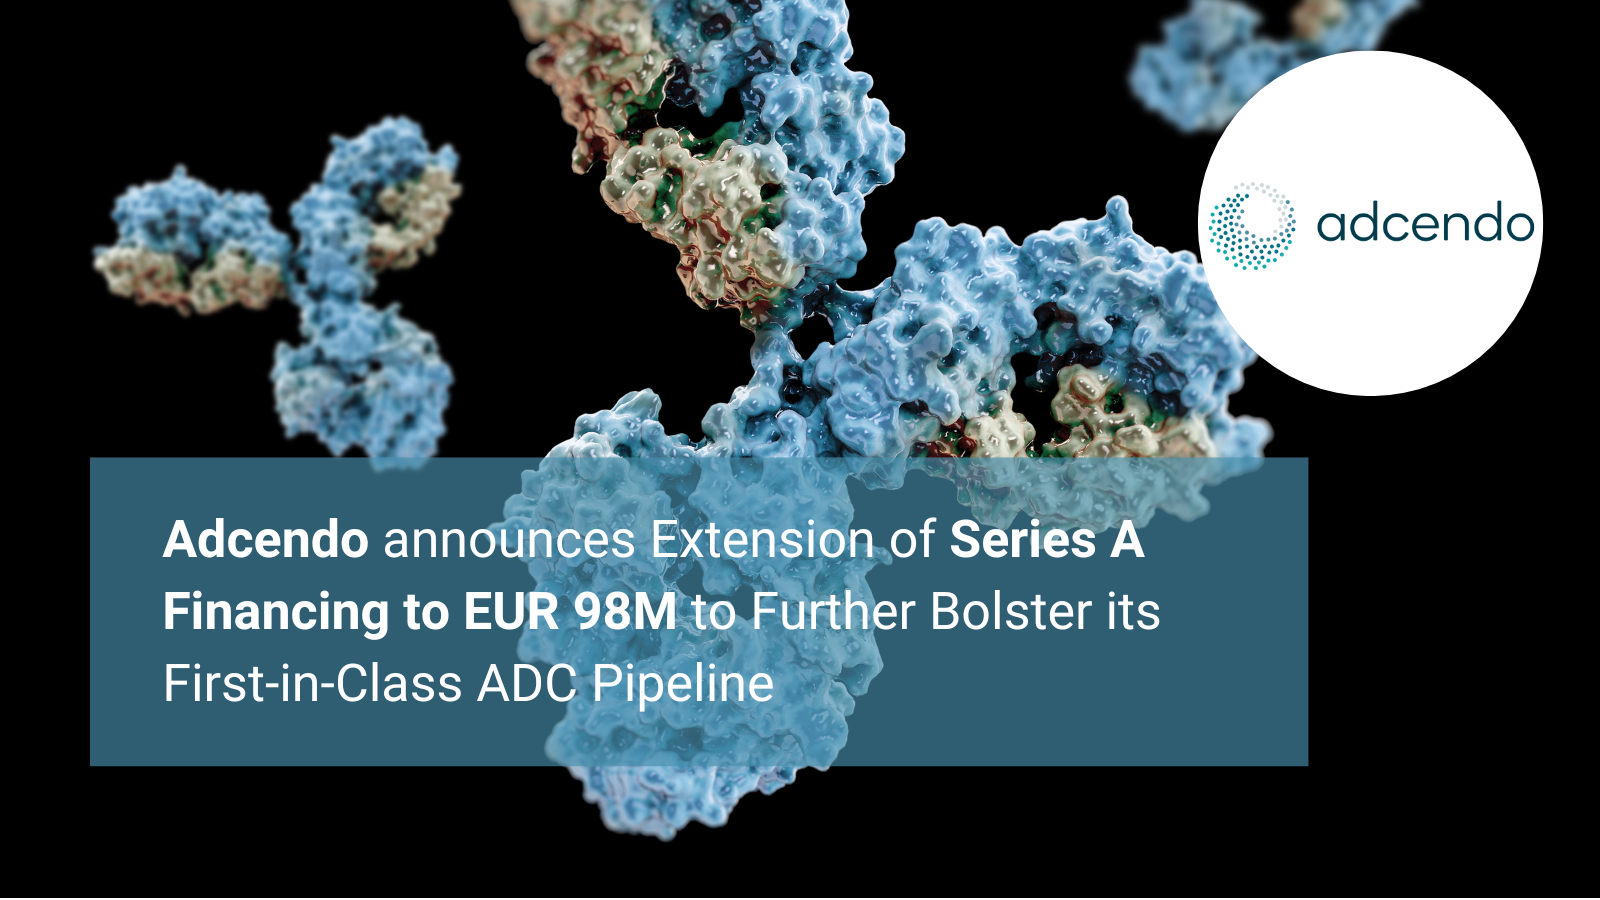 Adcendo ApS Announces Extension of Series A Financing to EUR 98M to Further Bolster its First-in-Class ADC Pipeline